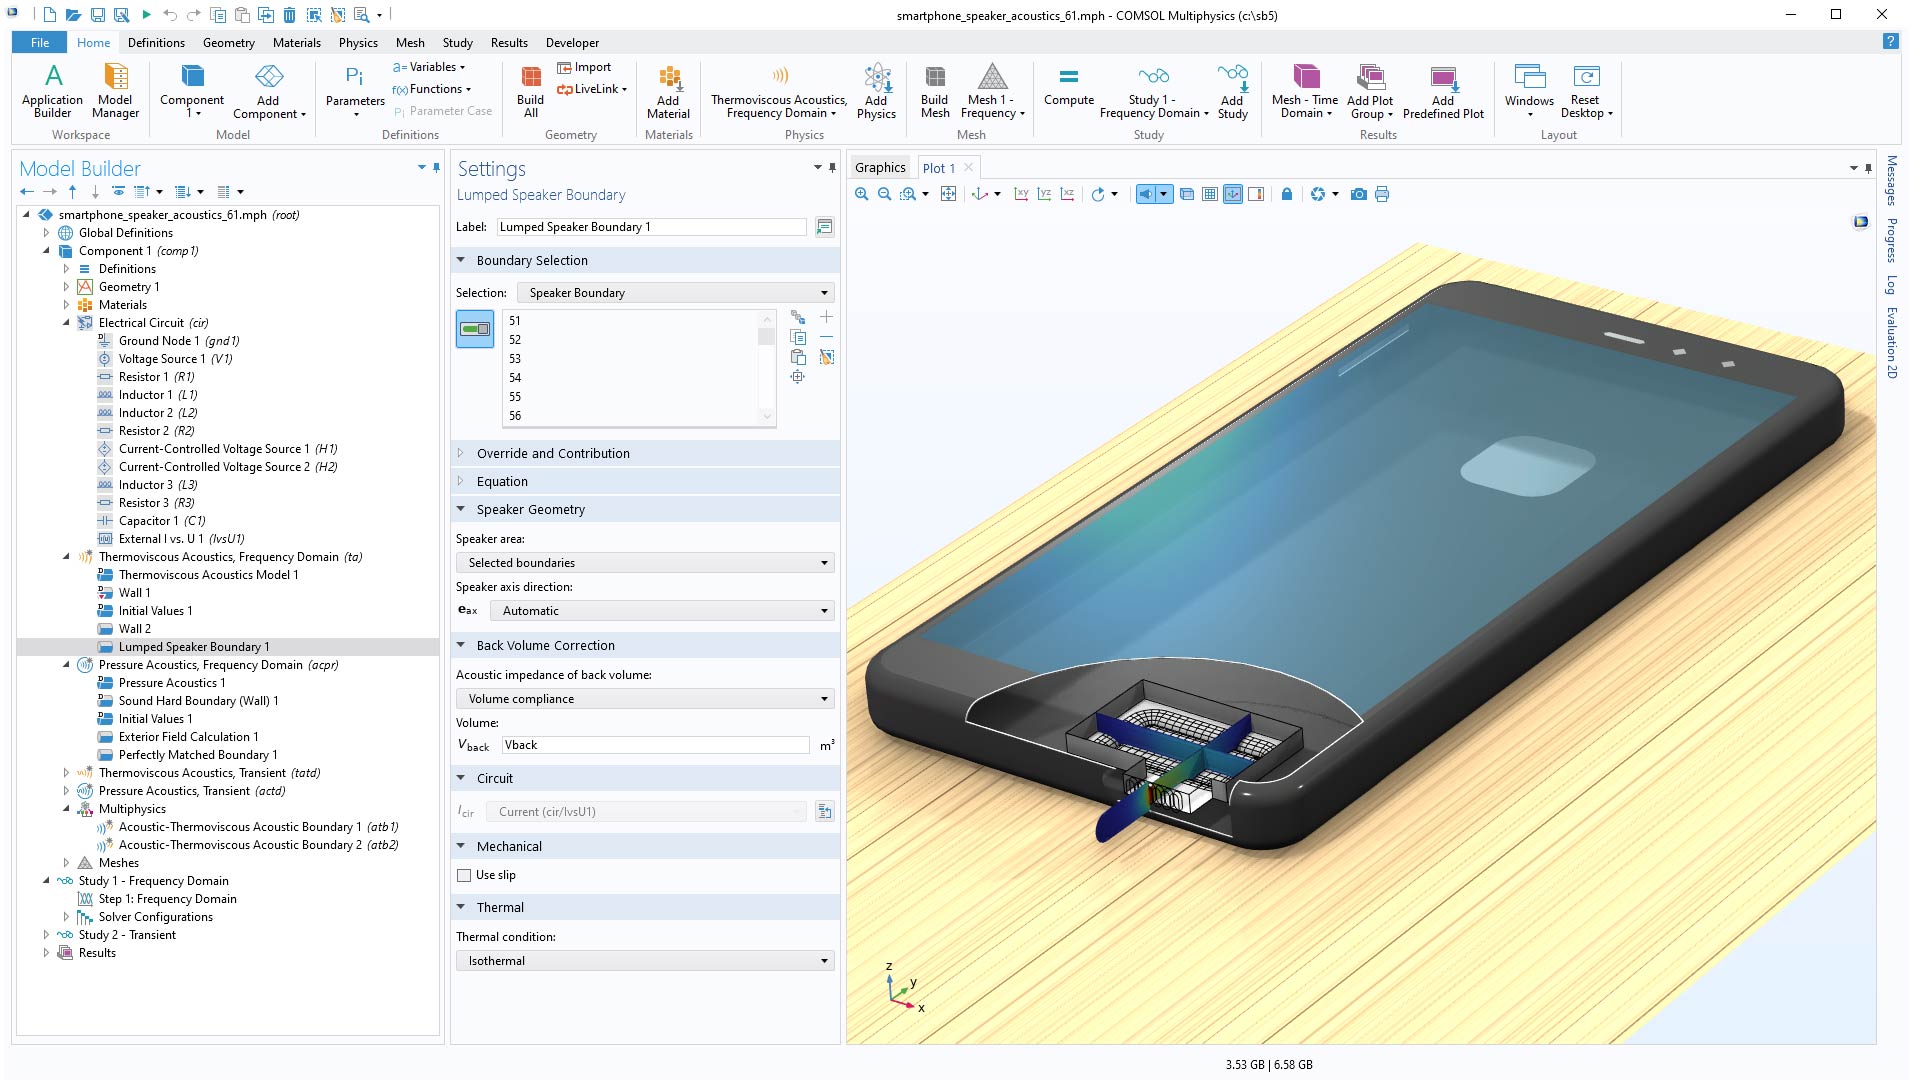 The COMSOL Multiphysics UI showing the Model Builder with the Lumped Speaker Boundary node highlighted, the corresponding Settings window, and a smartphone model in the Graphics window.